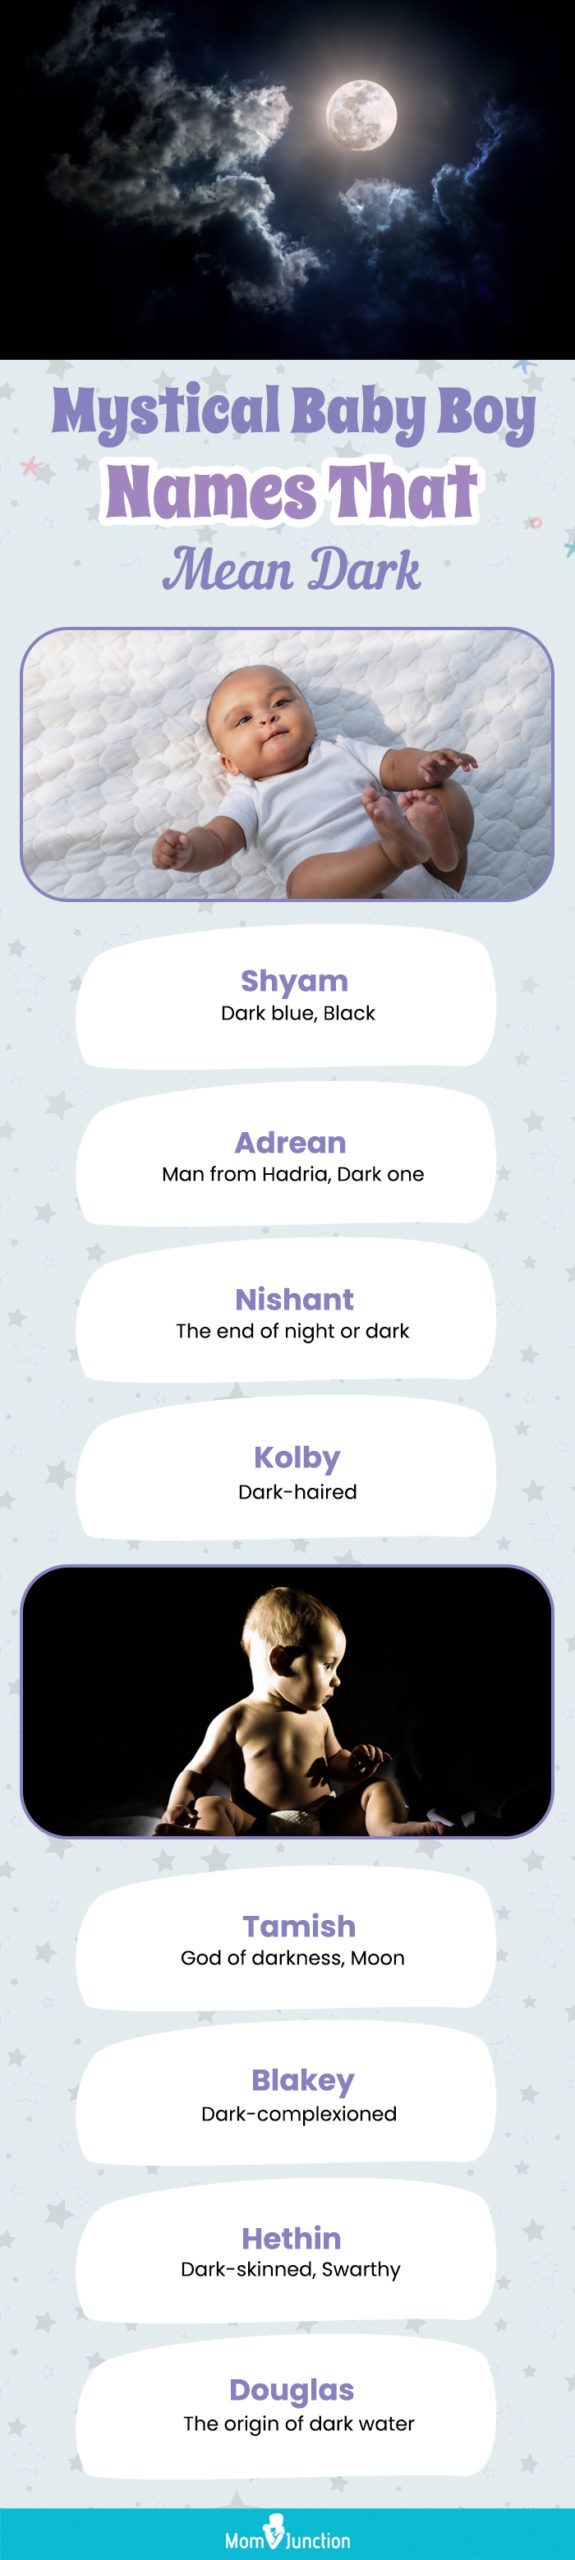 mystical baby boy names that means dark (infographic)